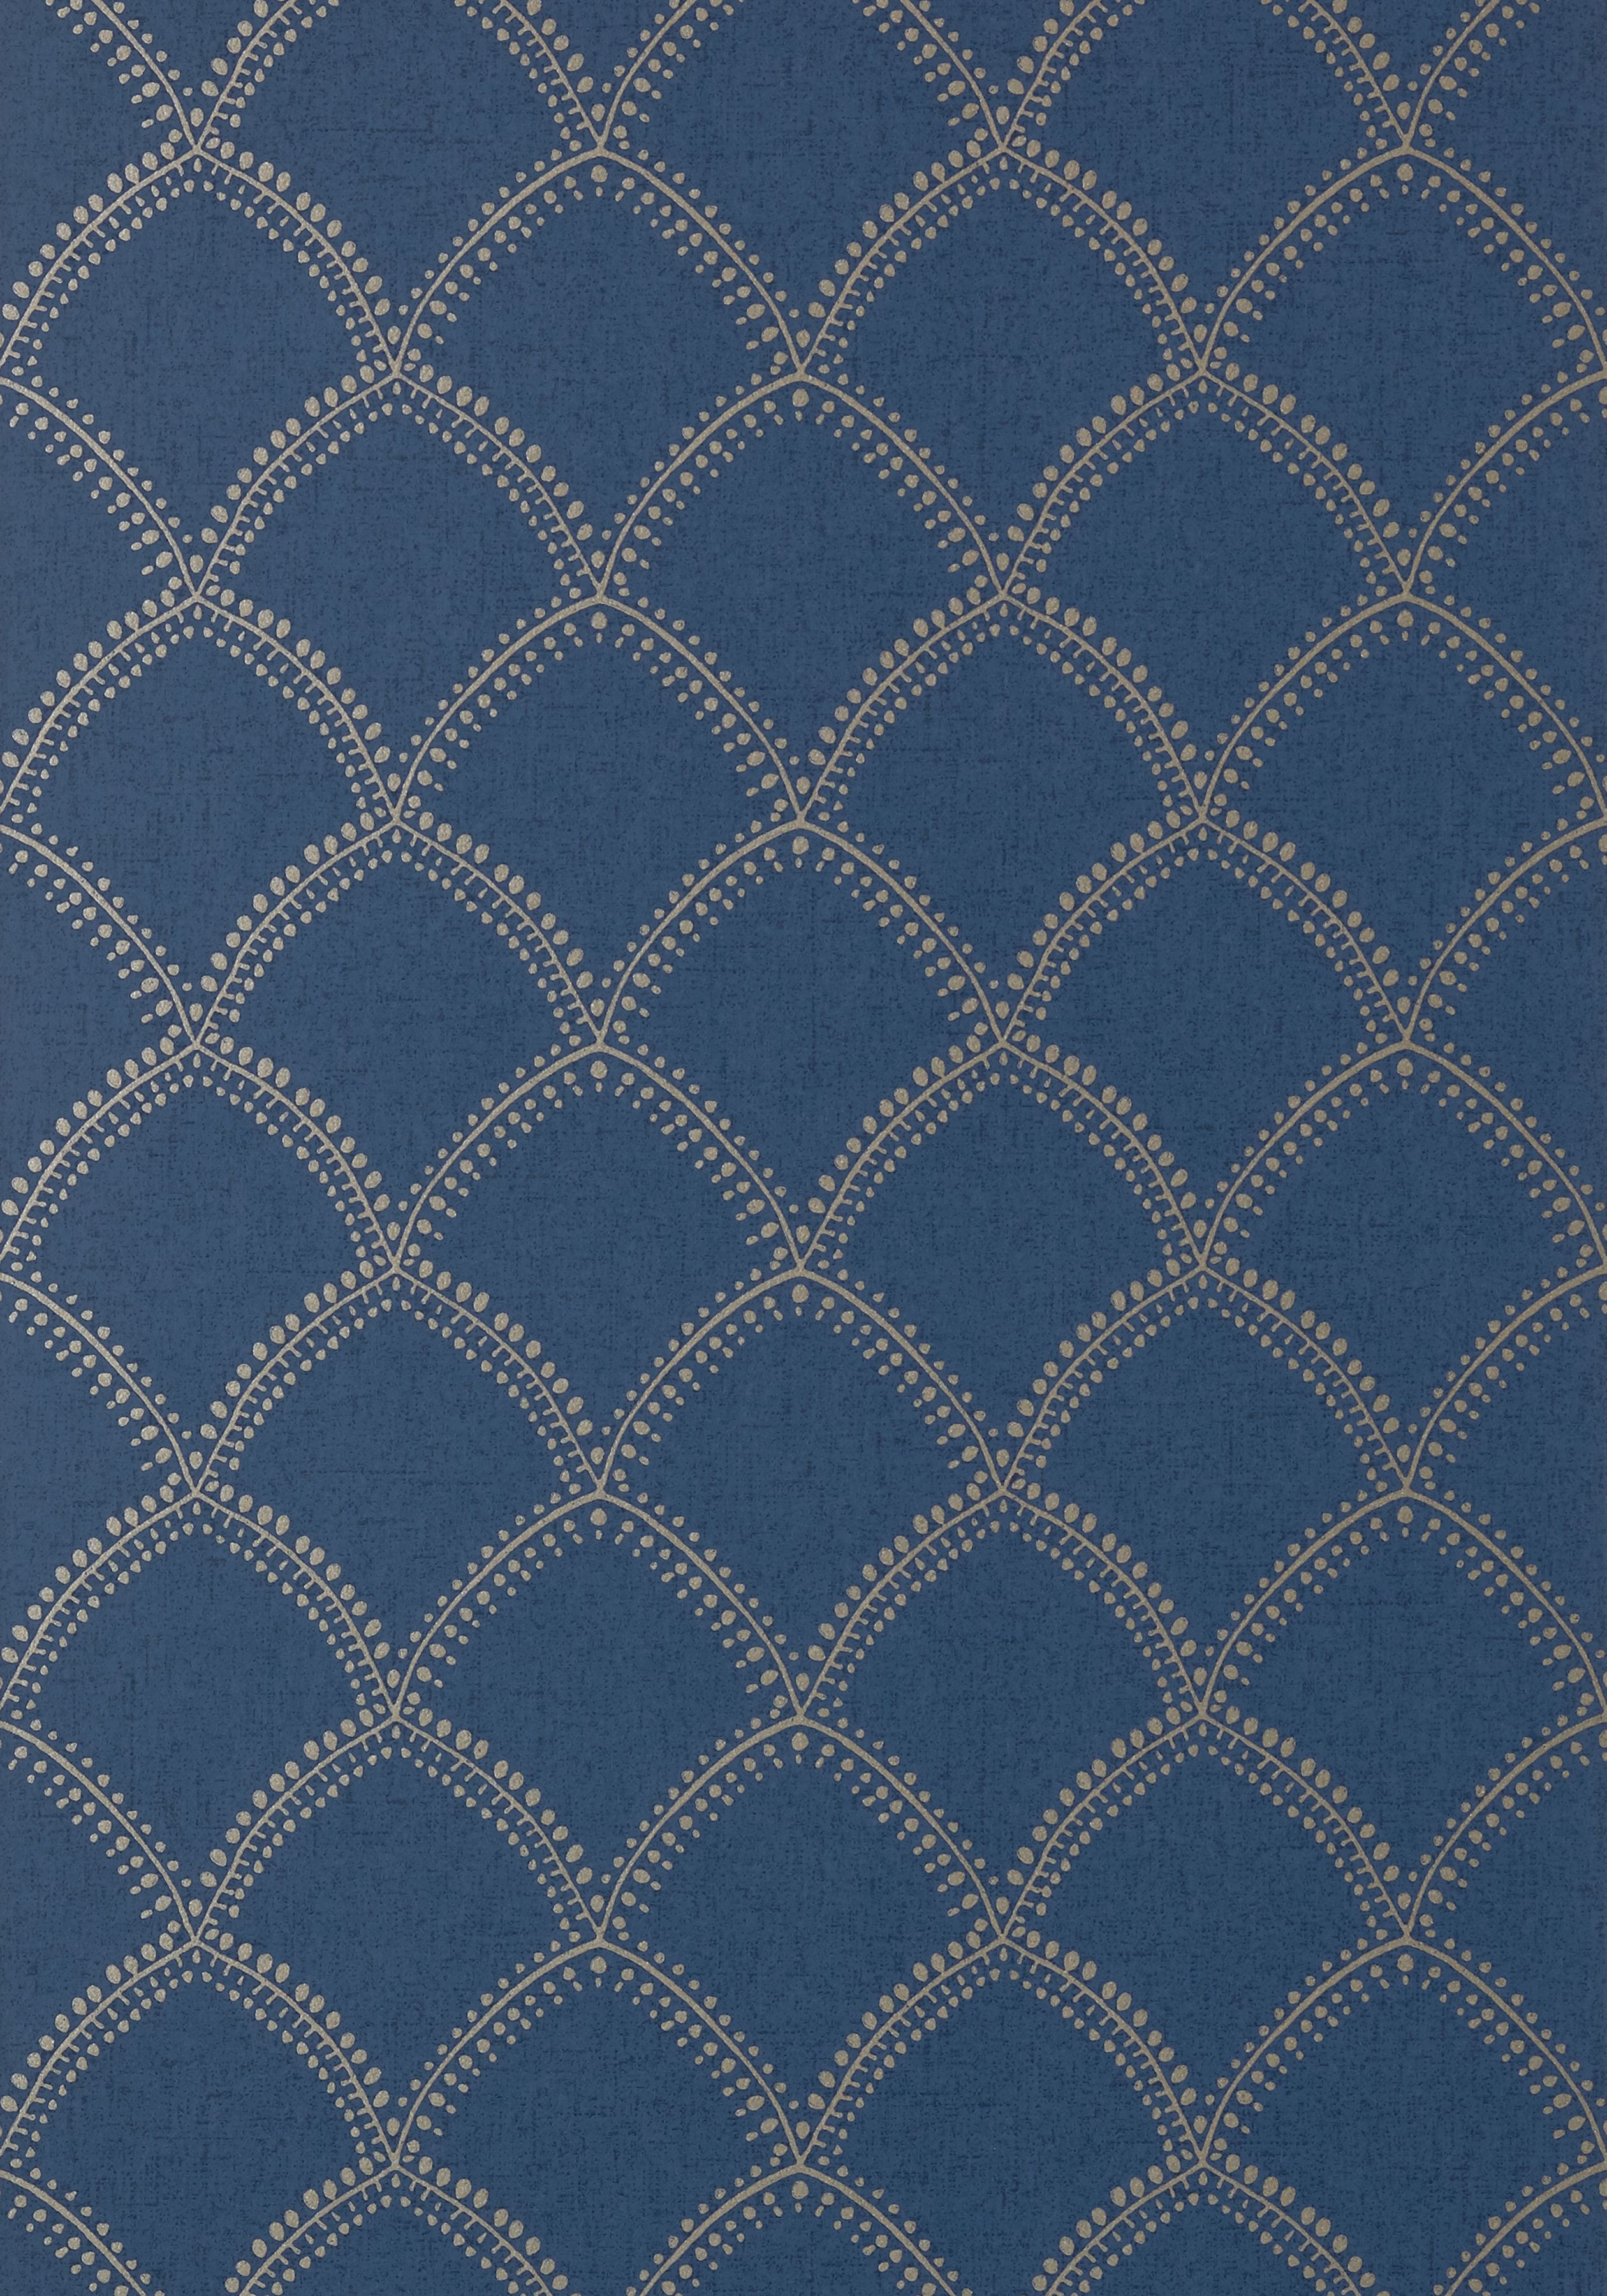 Burmese, Metallic On Navy, At7911, Collection Watermark - Pattern , HD Wallpaper & Backgrounds